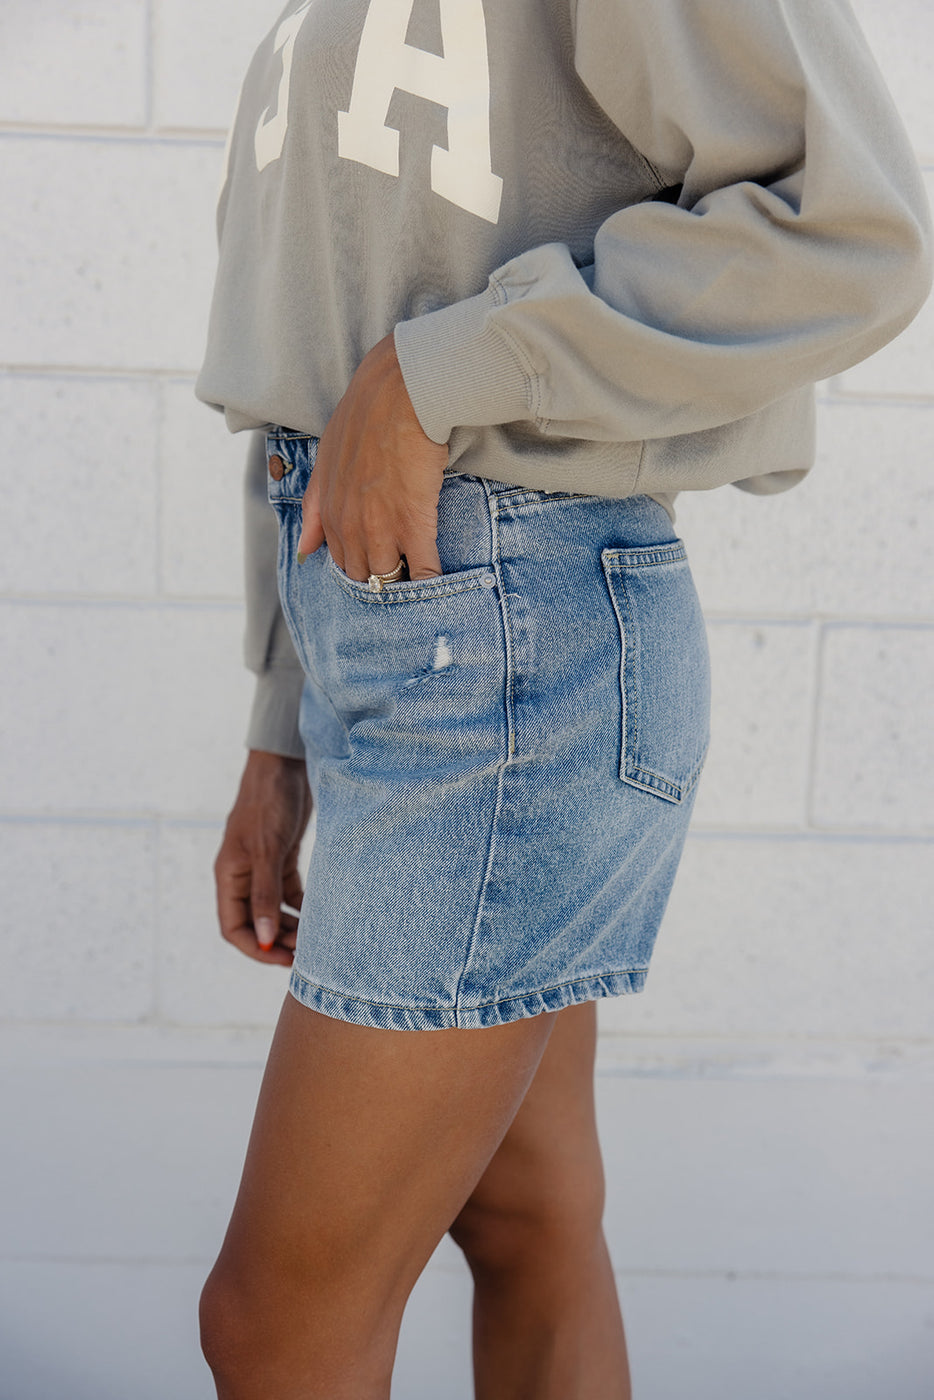 a person wearing a jean skirt